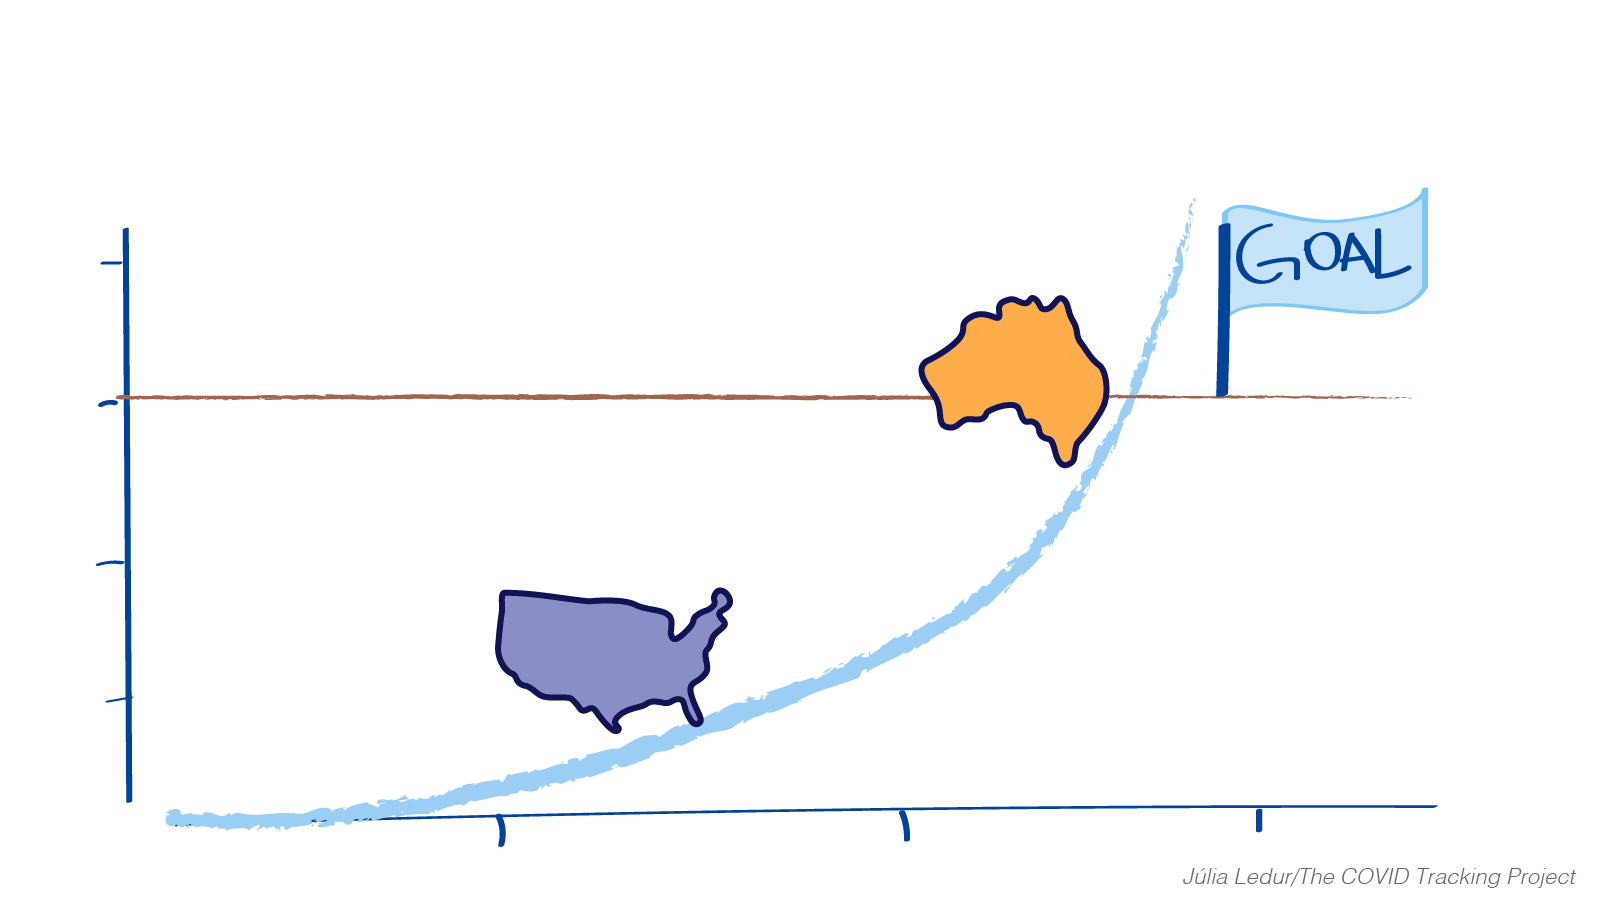 A drawing of the United States chases a drawing of Australia up a tests per positive curve